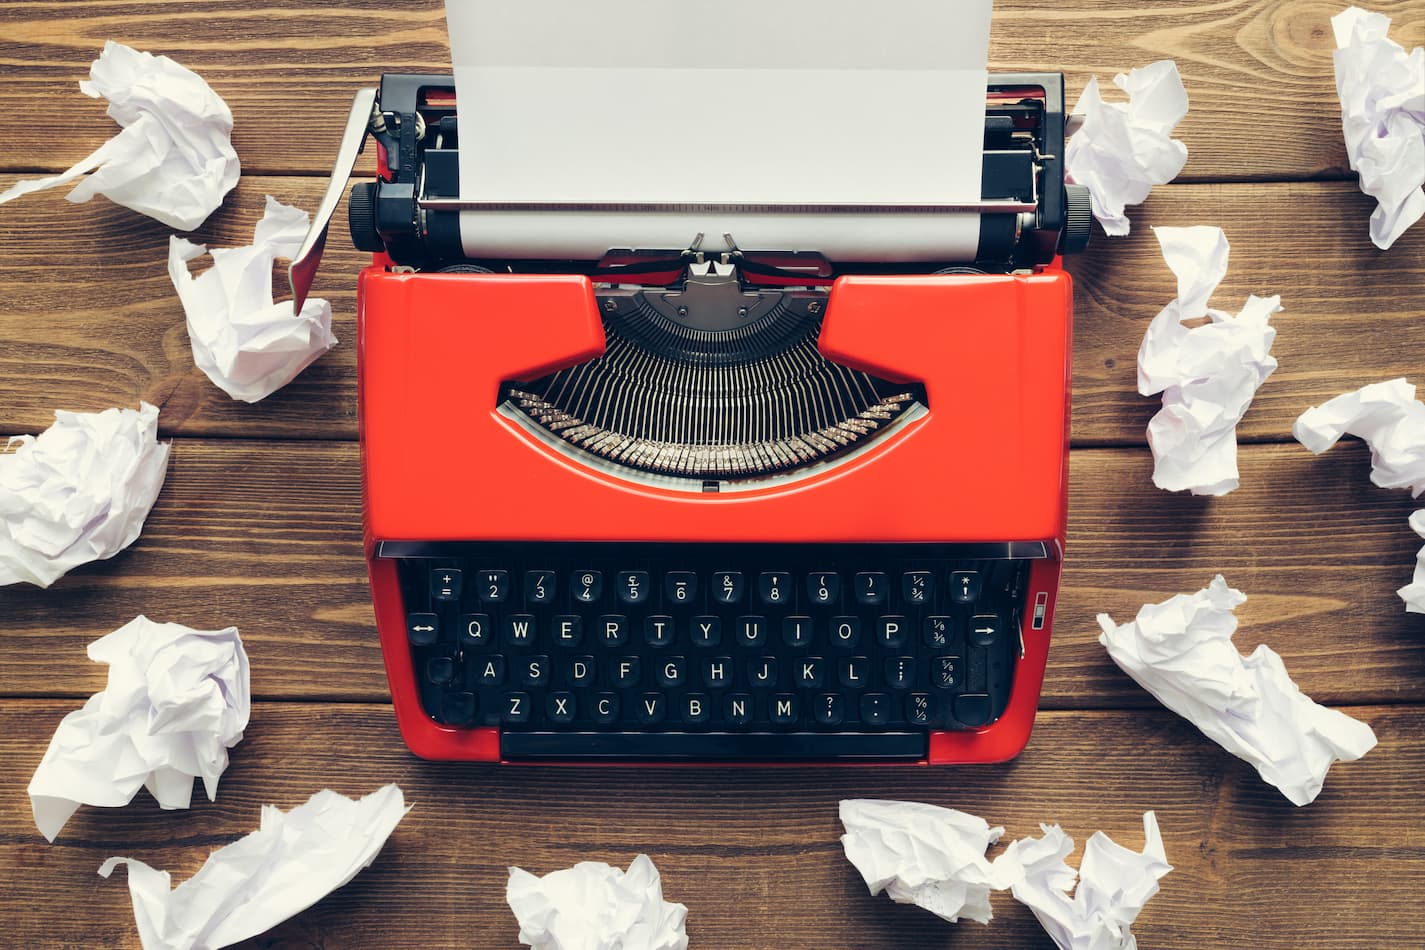 An image of a red typewriter surrounded by crumpled paper on a wooden slat background.